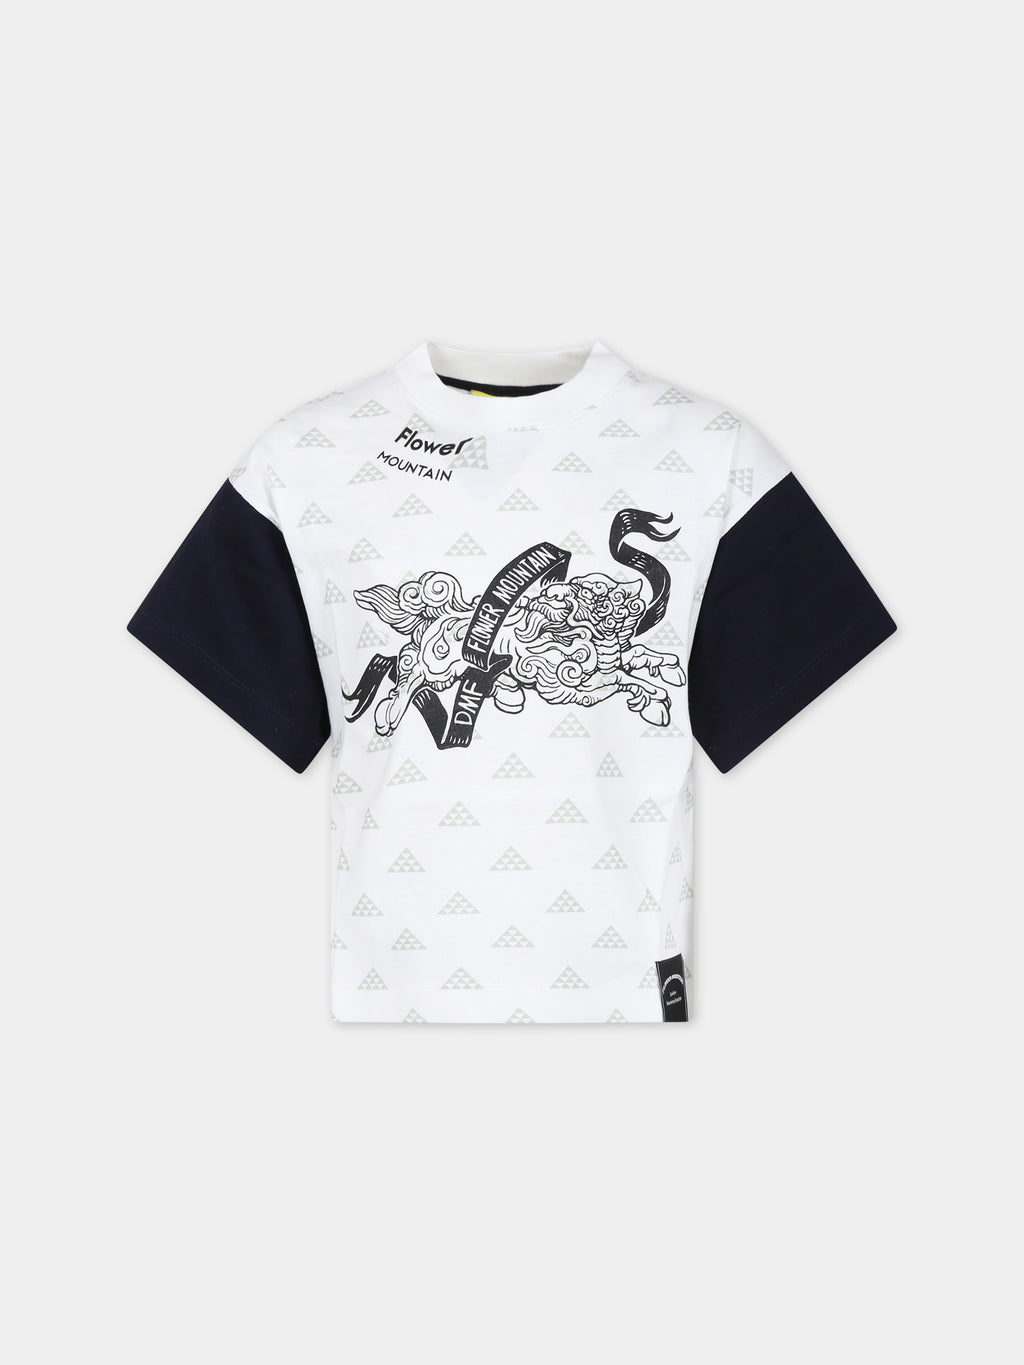 White t-shirt for kids with print